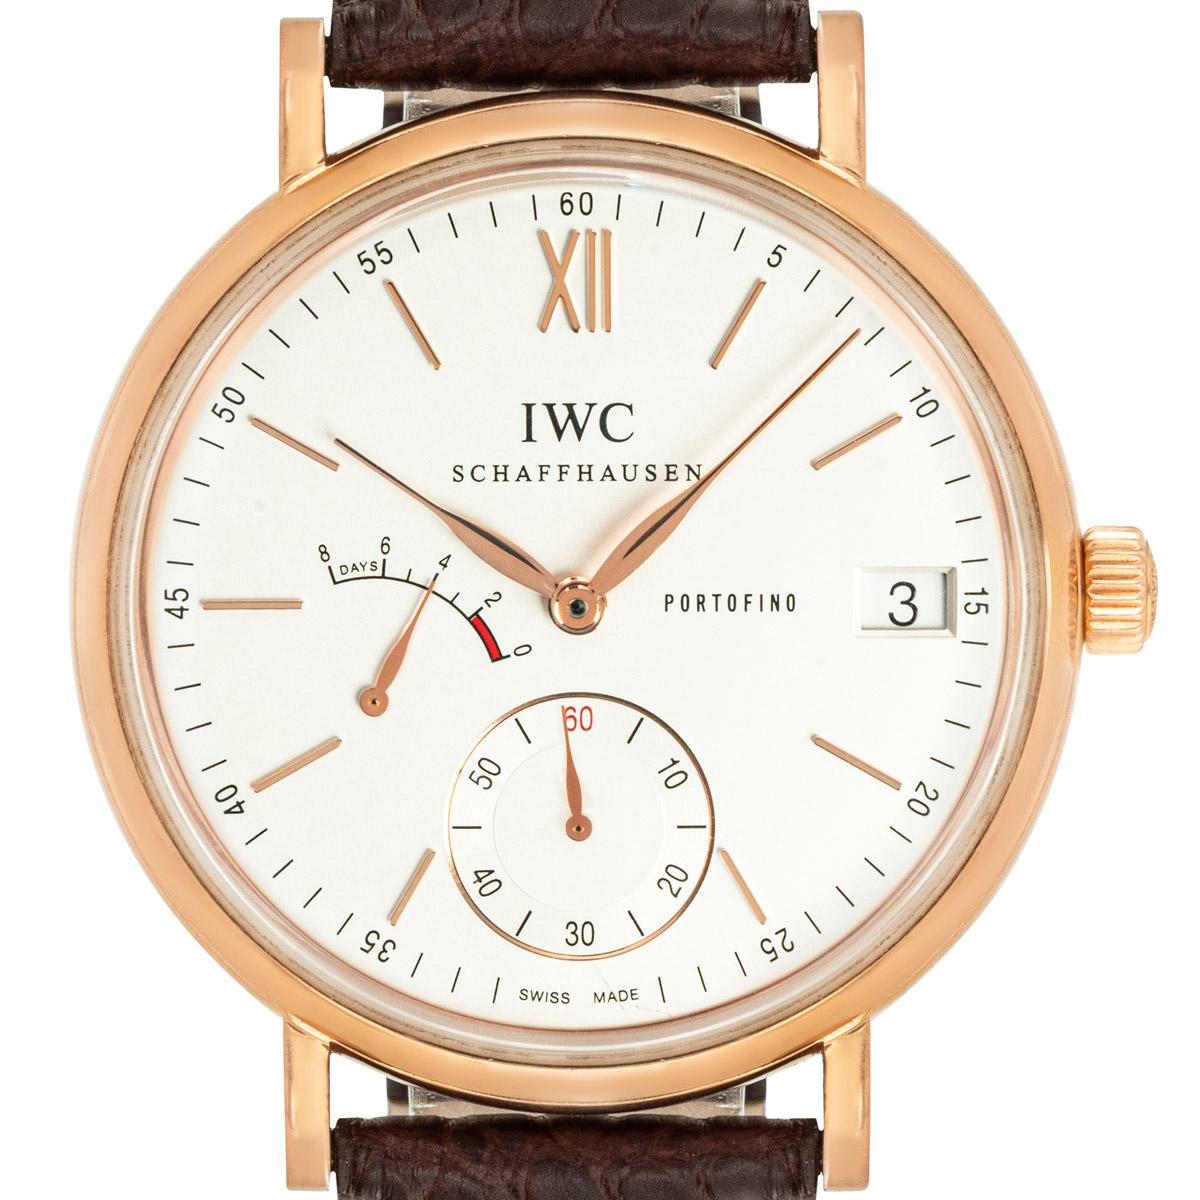 A rose gold 45mm Portofino wristwatch. Featuring a silver dial with applied hour markers, a date aperture, an 8-day power reserve indicator and a small seconds subdial.

The watch is presented on a generic brown leather strap and an IWC yellow gold